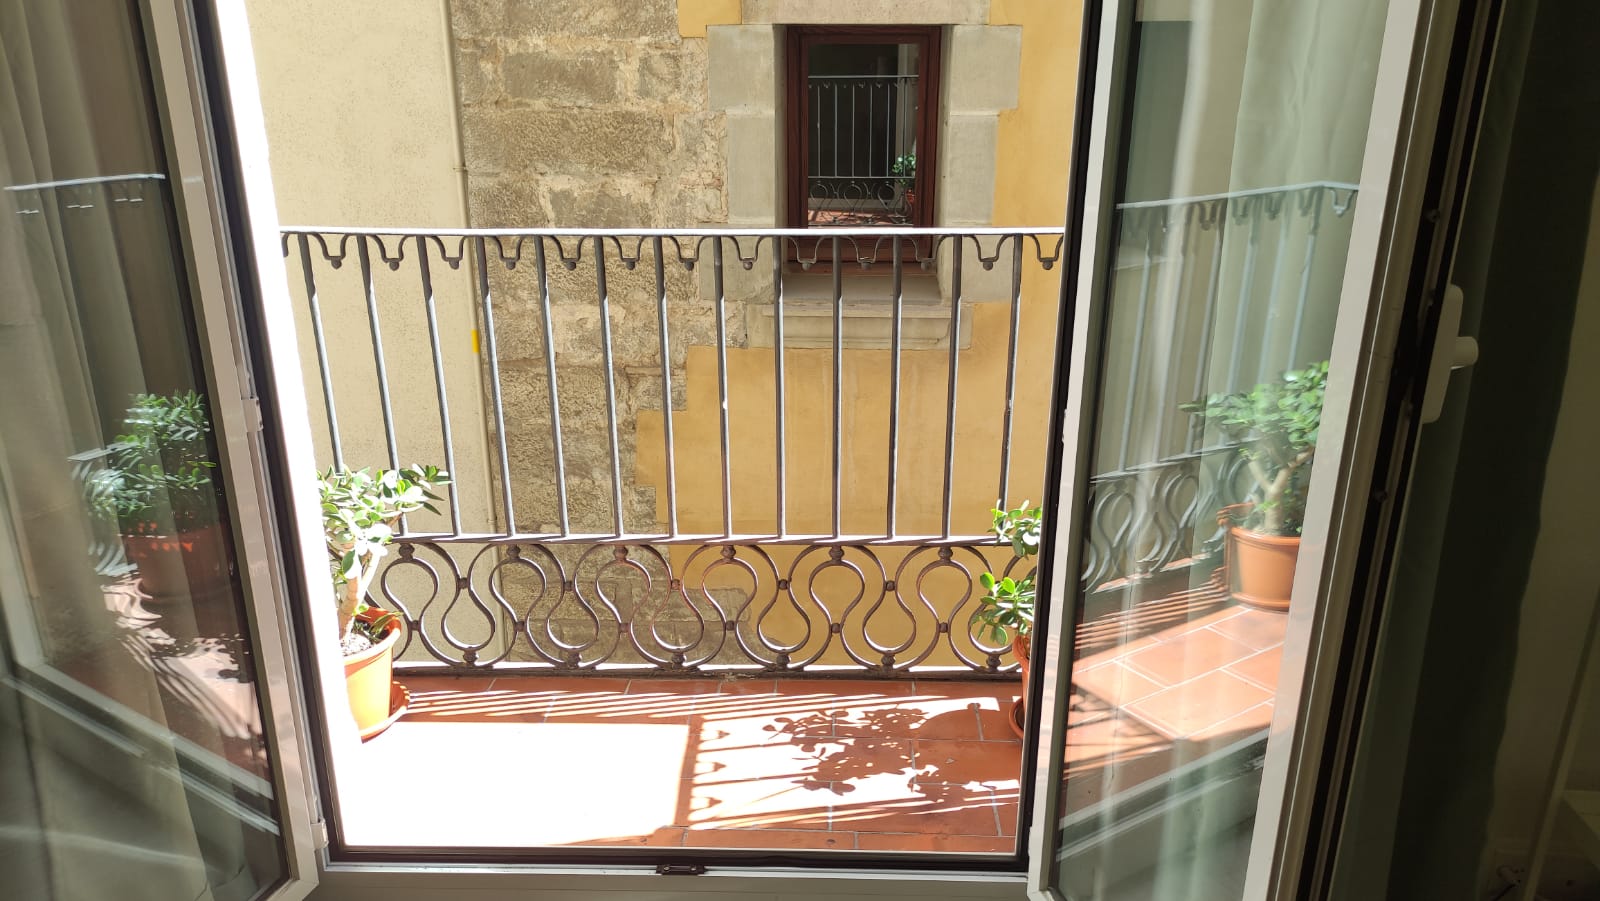 Monec - Furnished flat for rent in Barcelona